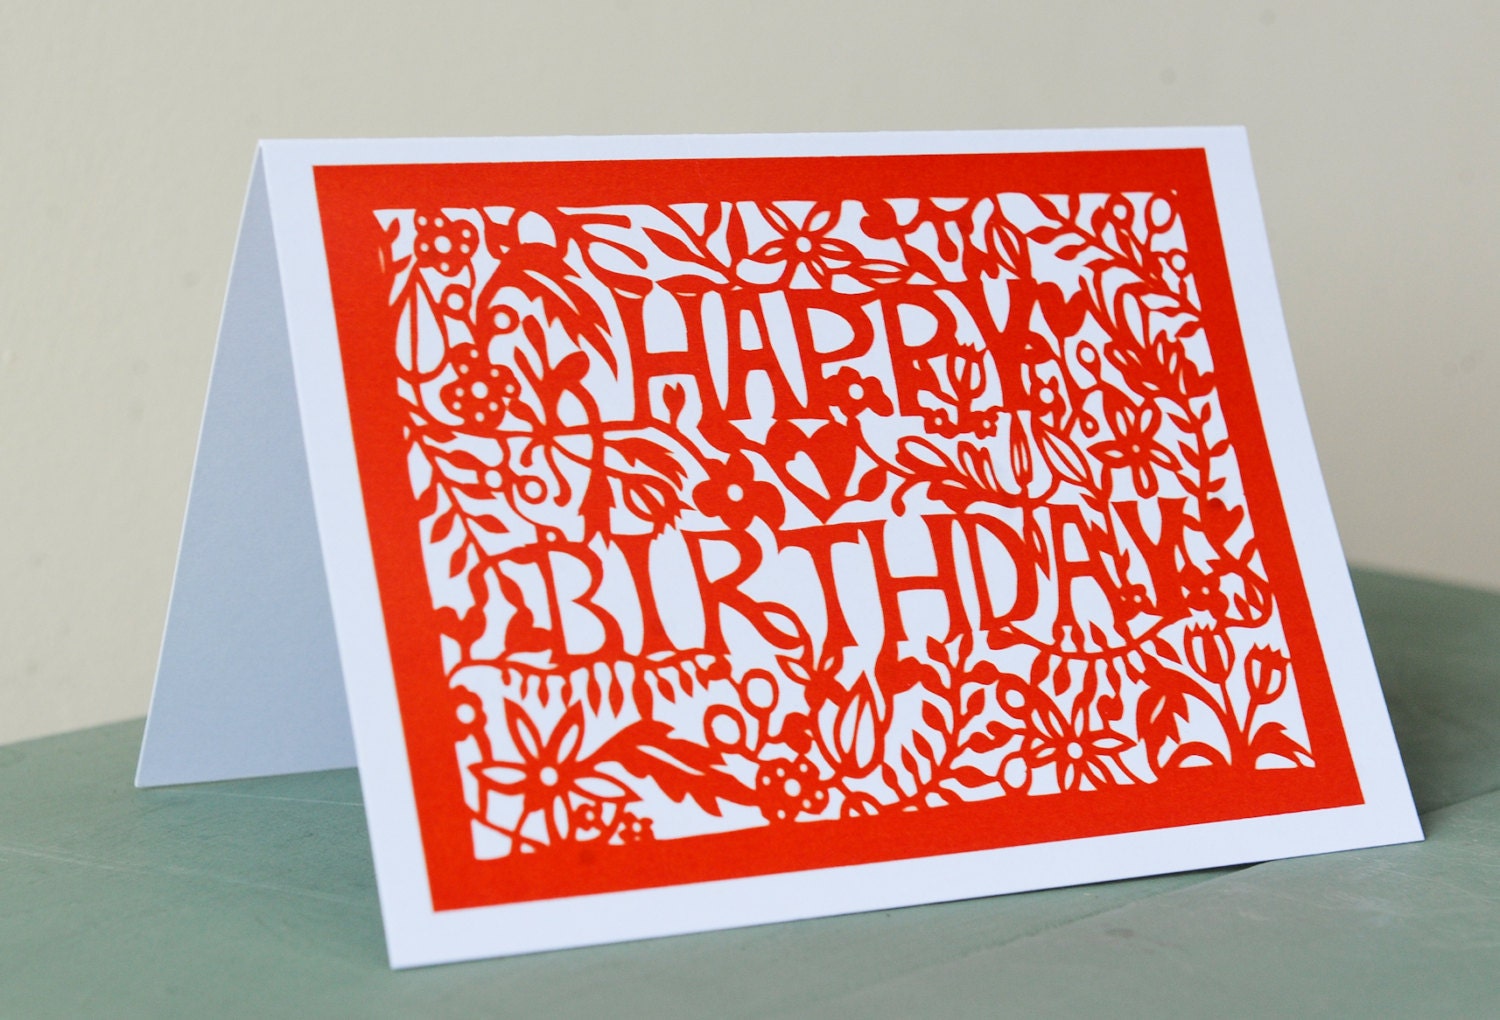 Happy Birthday greetings card, printed from an original papercut design made by me at Seren Papercuts.